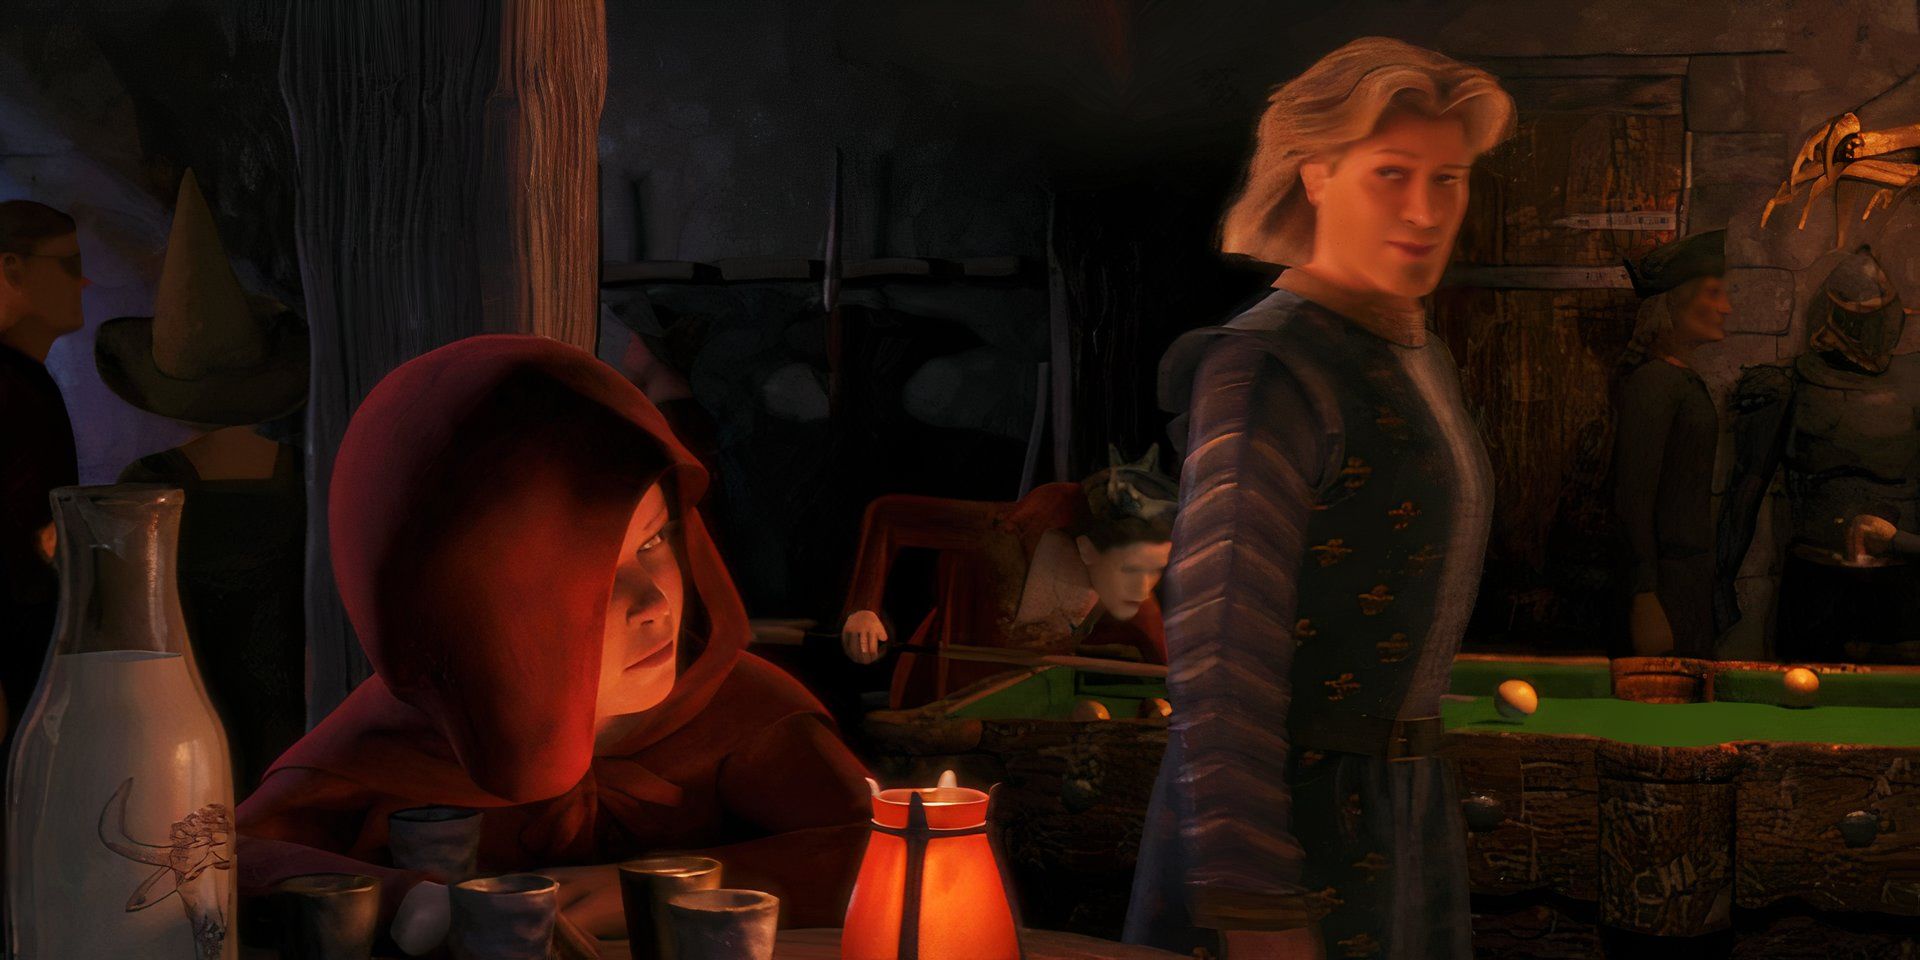 Shrek 3 Little Red Riding Hood looking at Prince Charming at the Poison Apple tavern